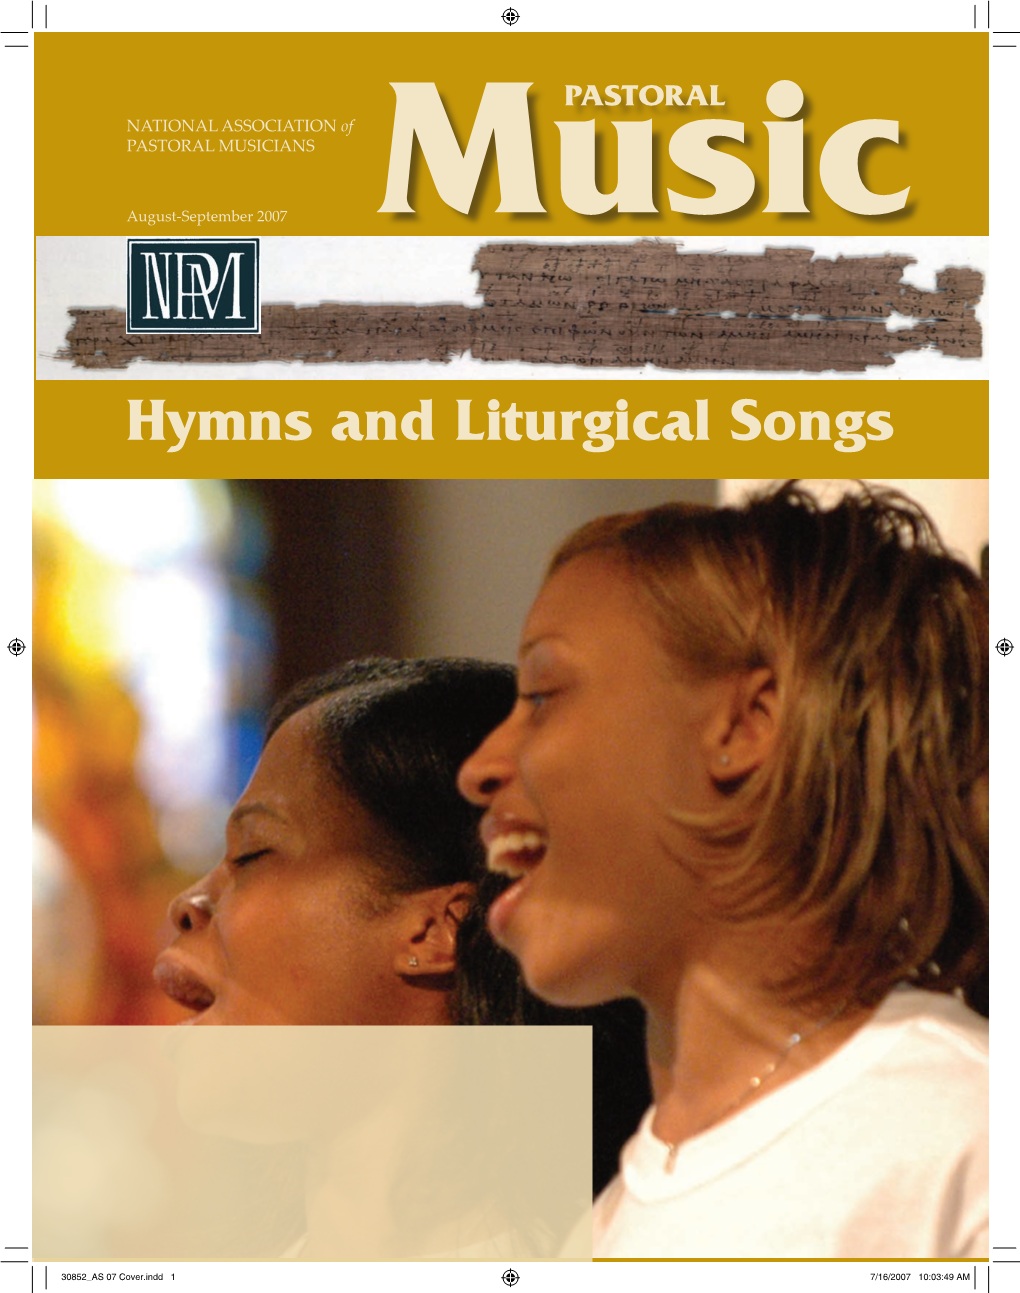 Hymns and Liturgical Songs